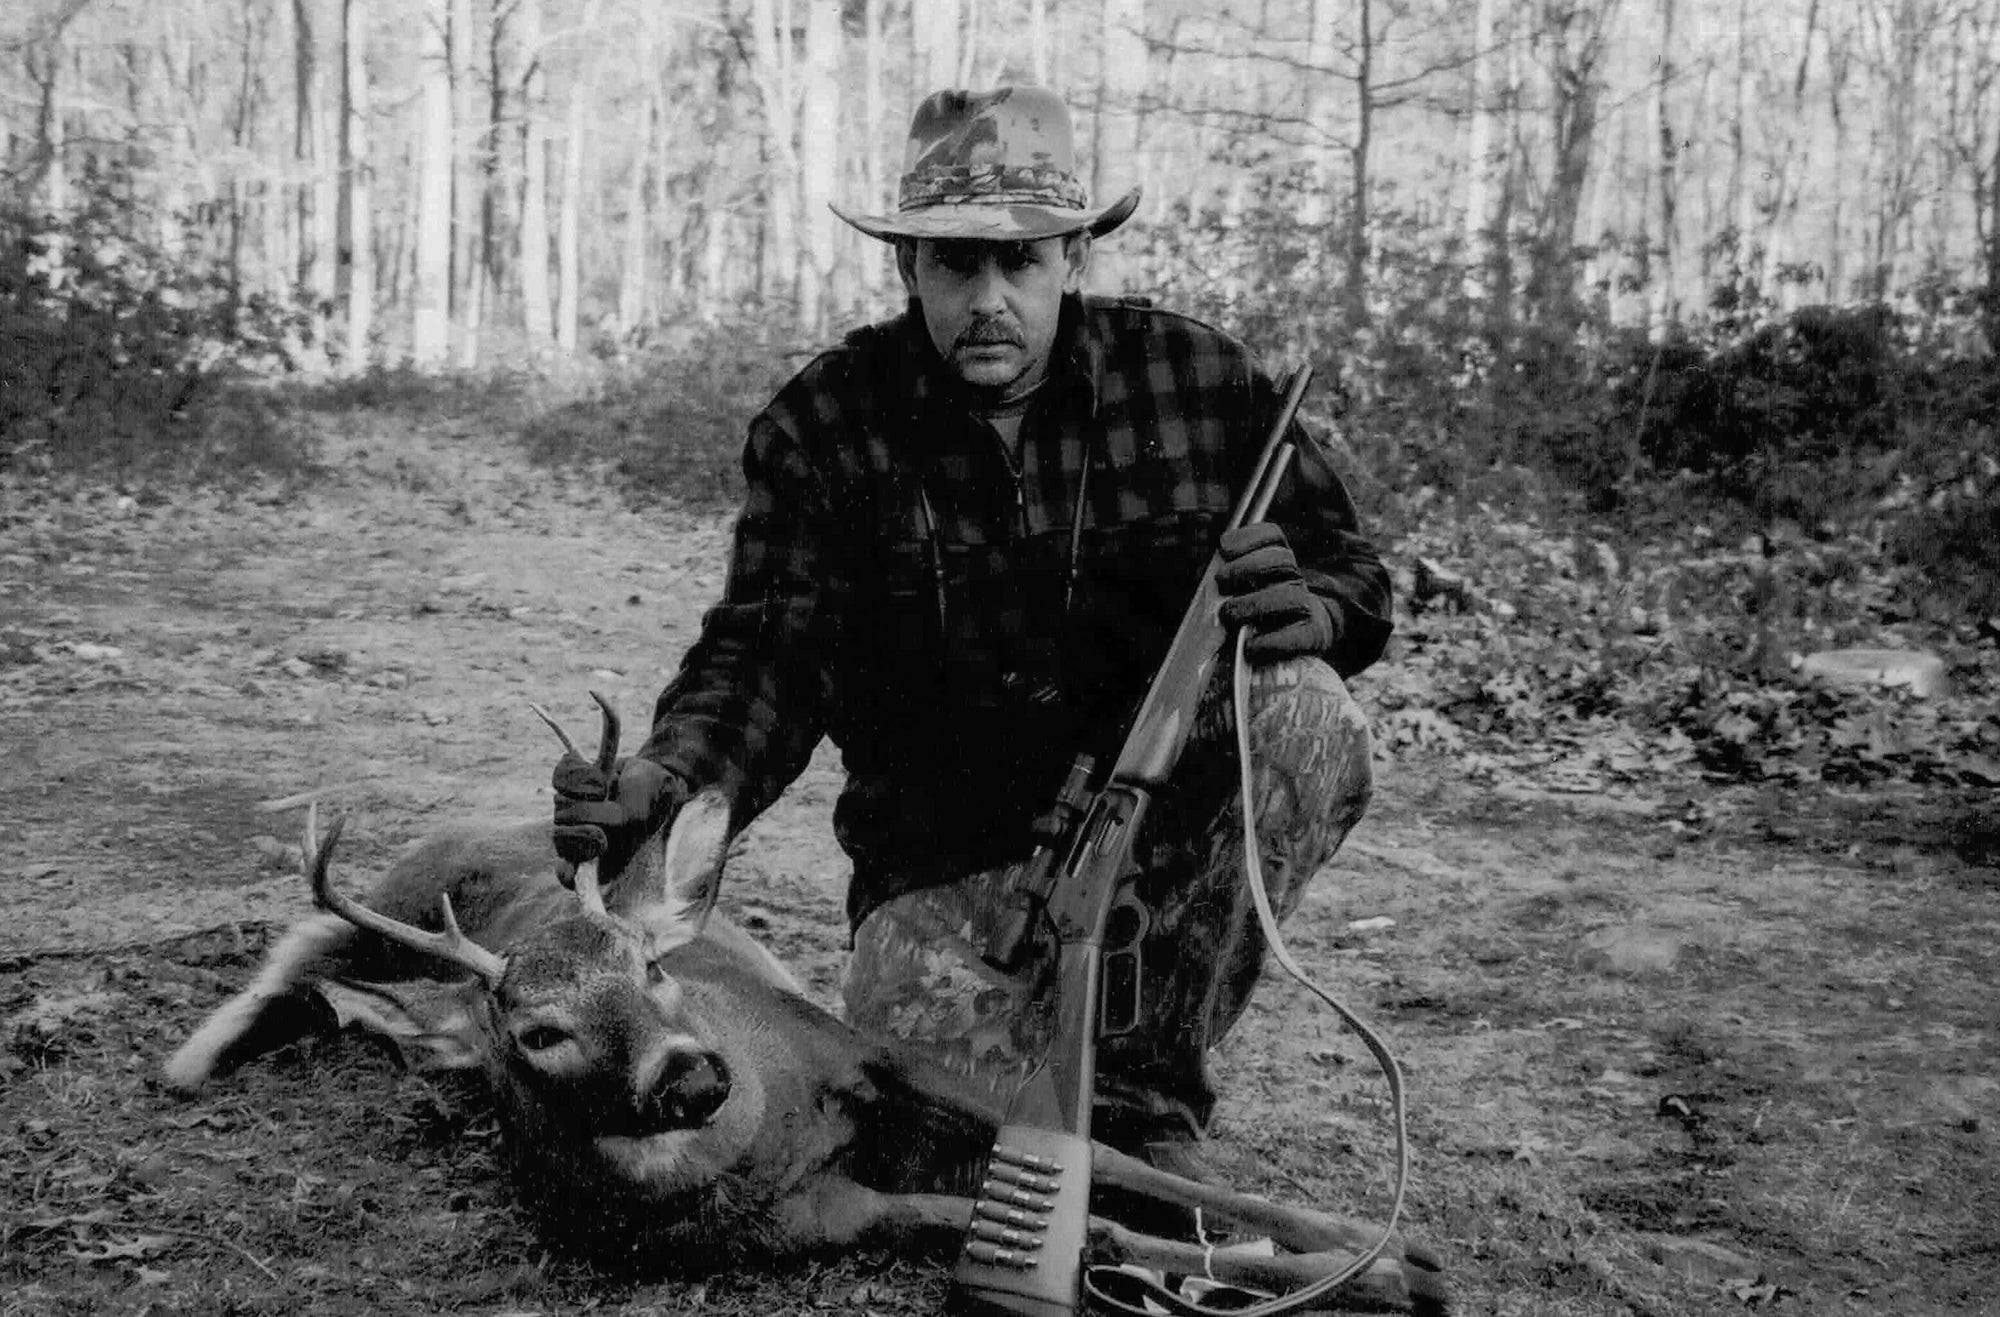 Hunter next to a dead deer with a lever-action rifle in his hand.